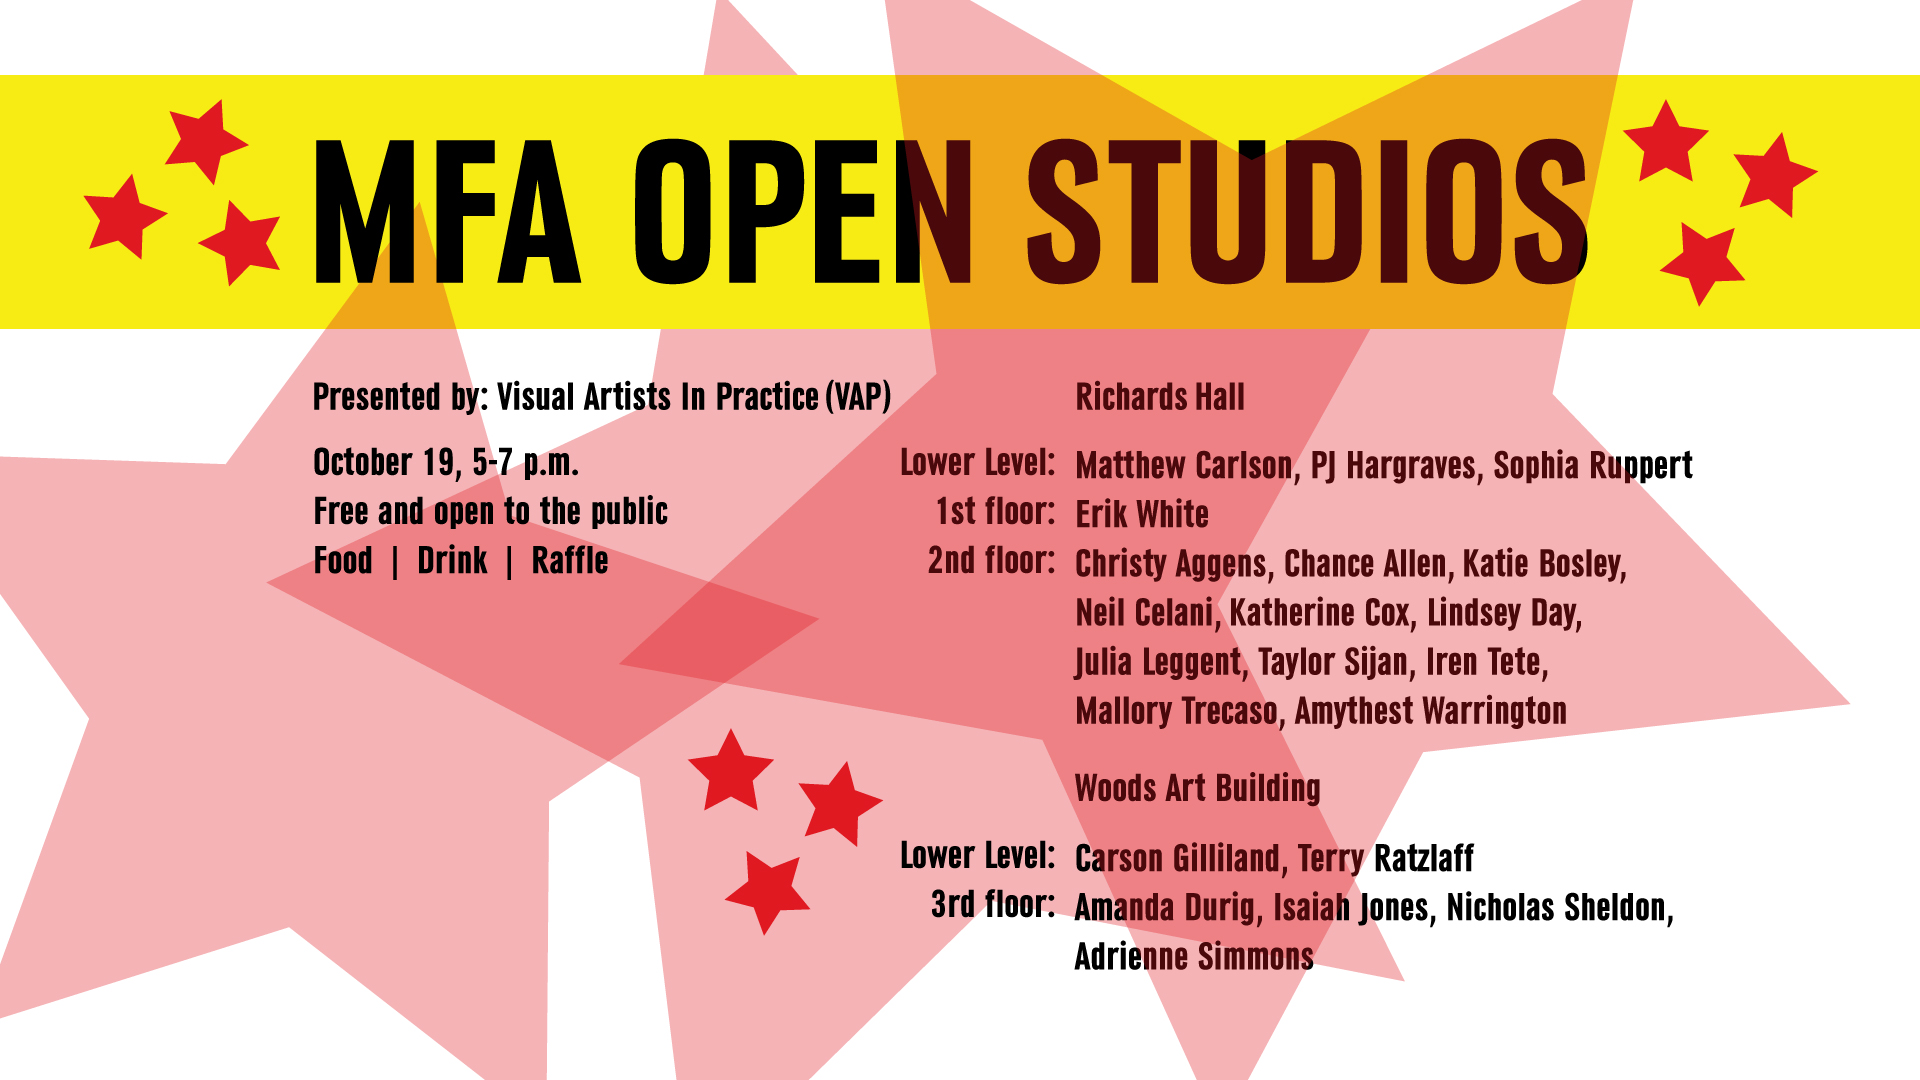 MFA Open Studios will be Oct. 19th from 5-7 p.m. in Richards Hall and Woods Art Building